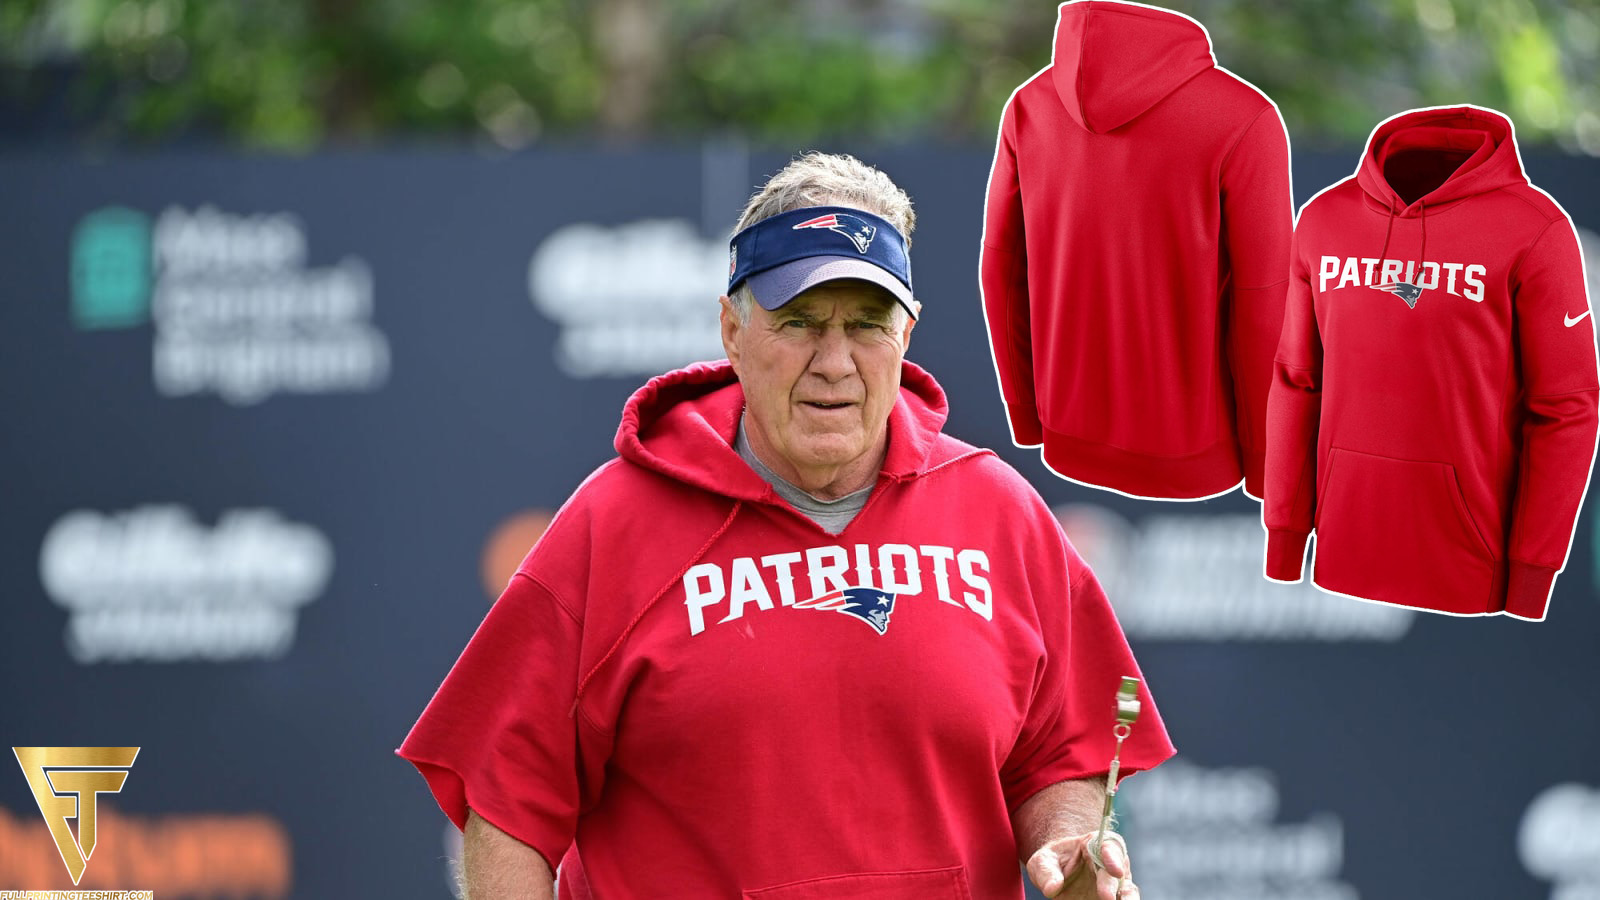 The Legend in the Red Hoodie: Bill Belichick and the New England Patriots